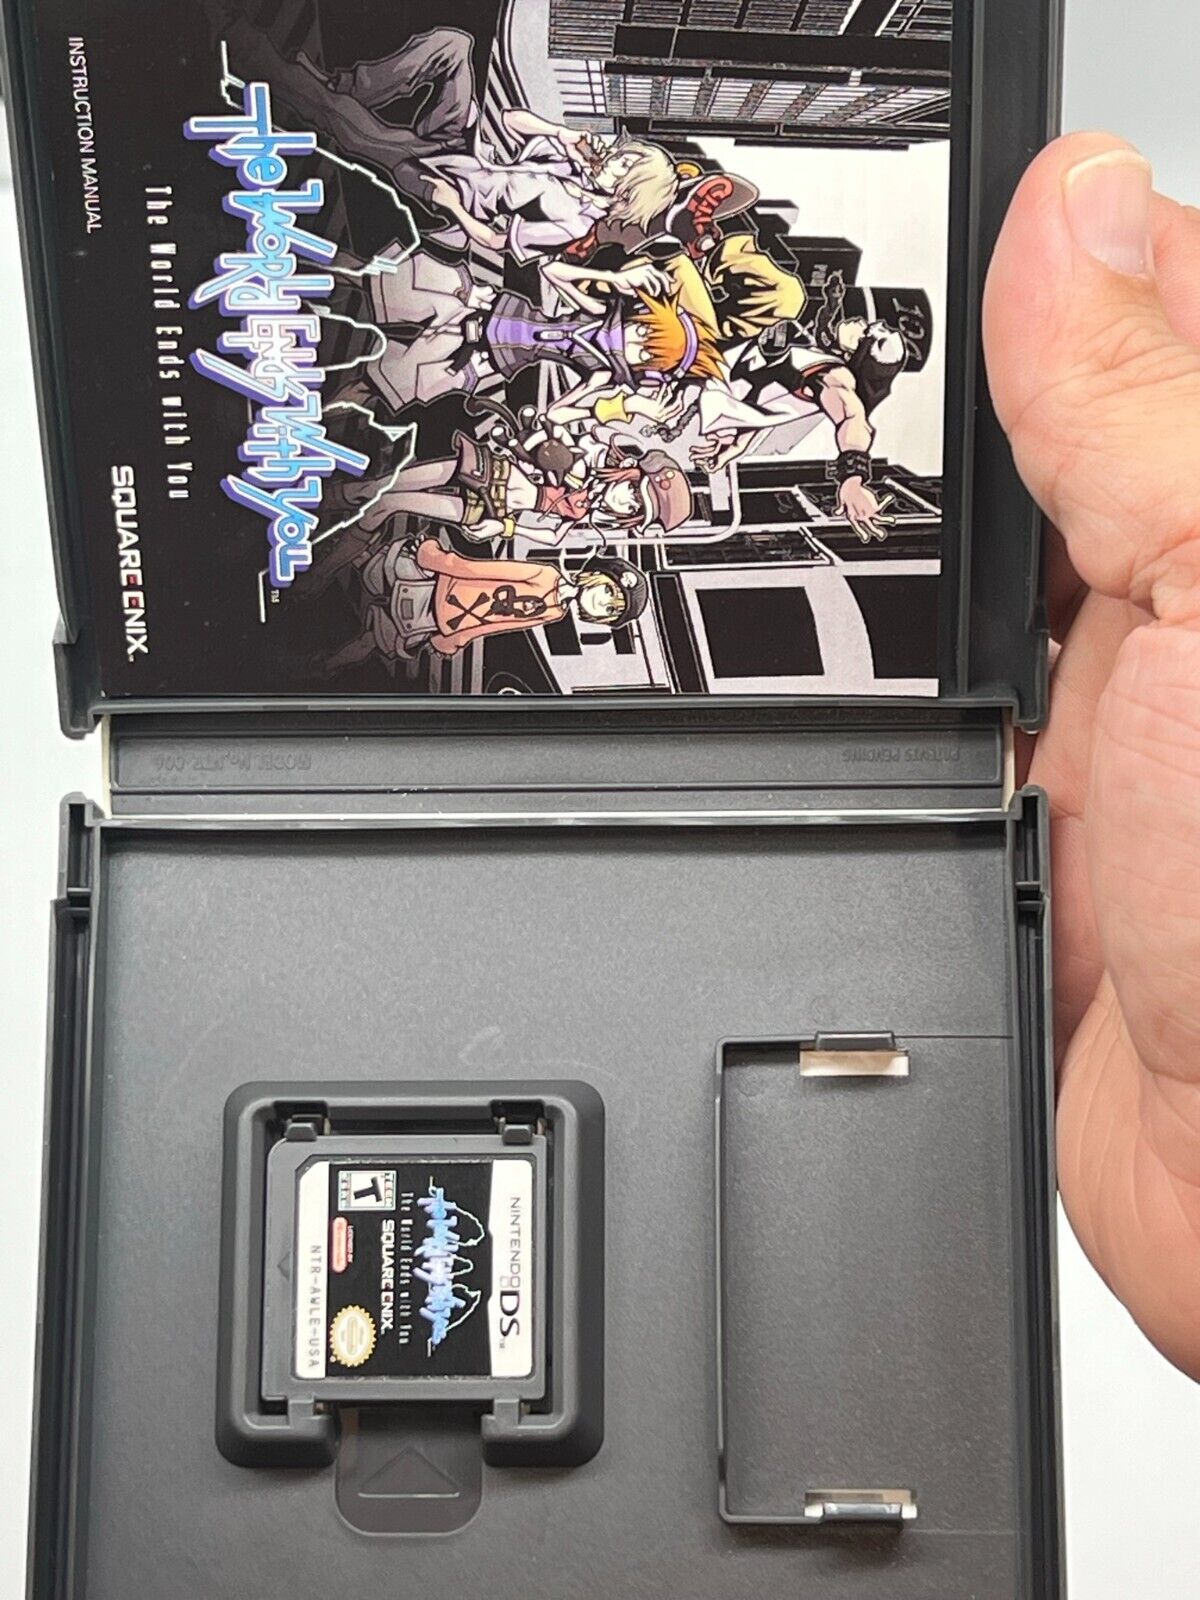 The World Ends with You (DS, 2008) - Tested